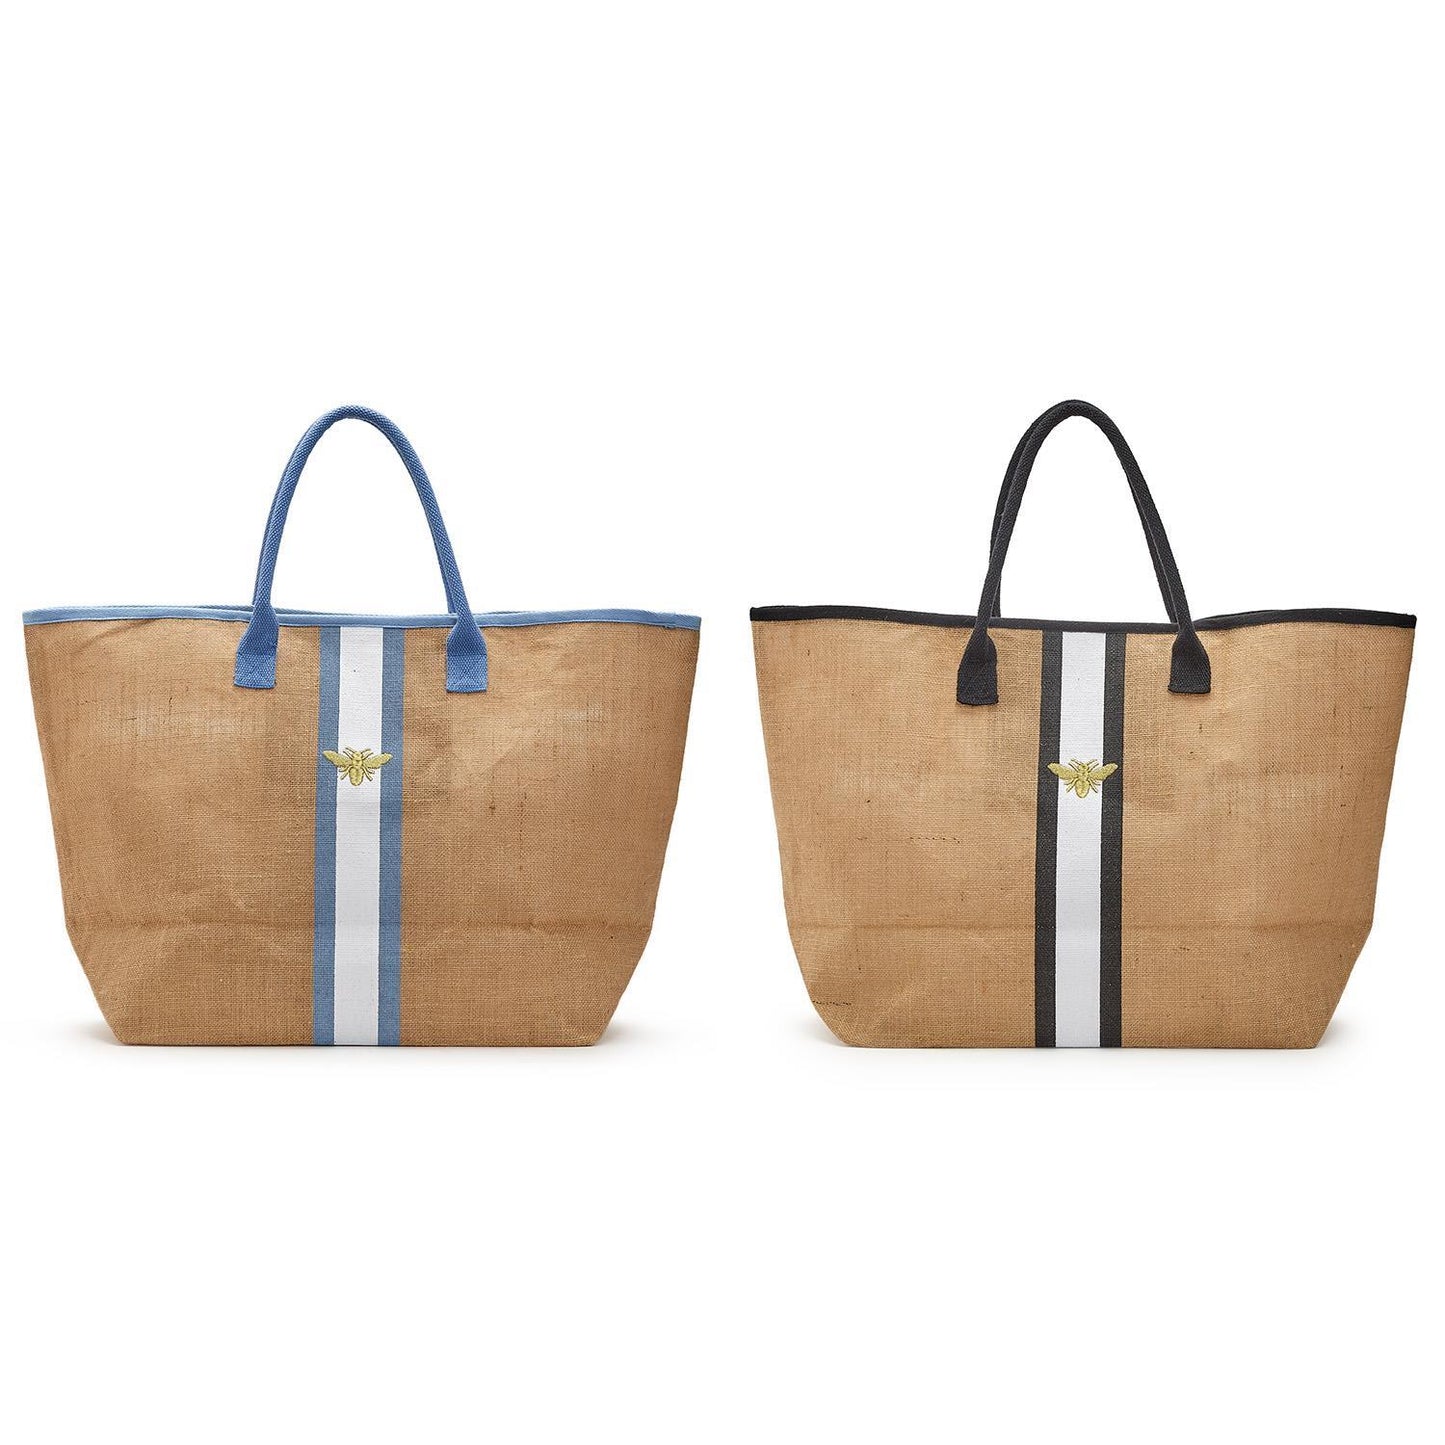 Two's Company Golden Bee Jute Tote Bag Assorted 2 Colors